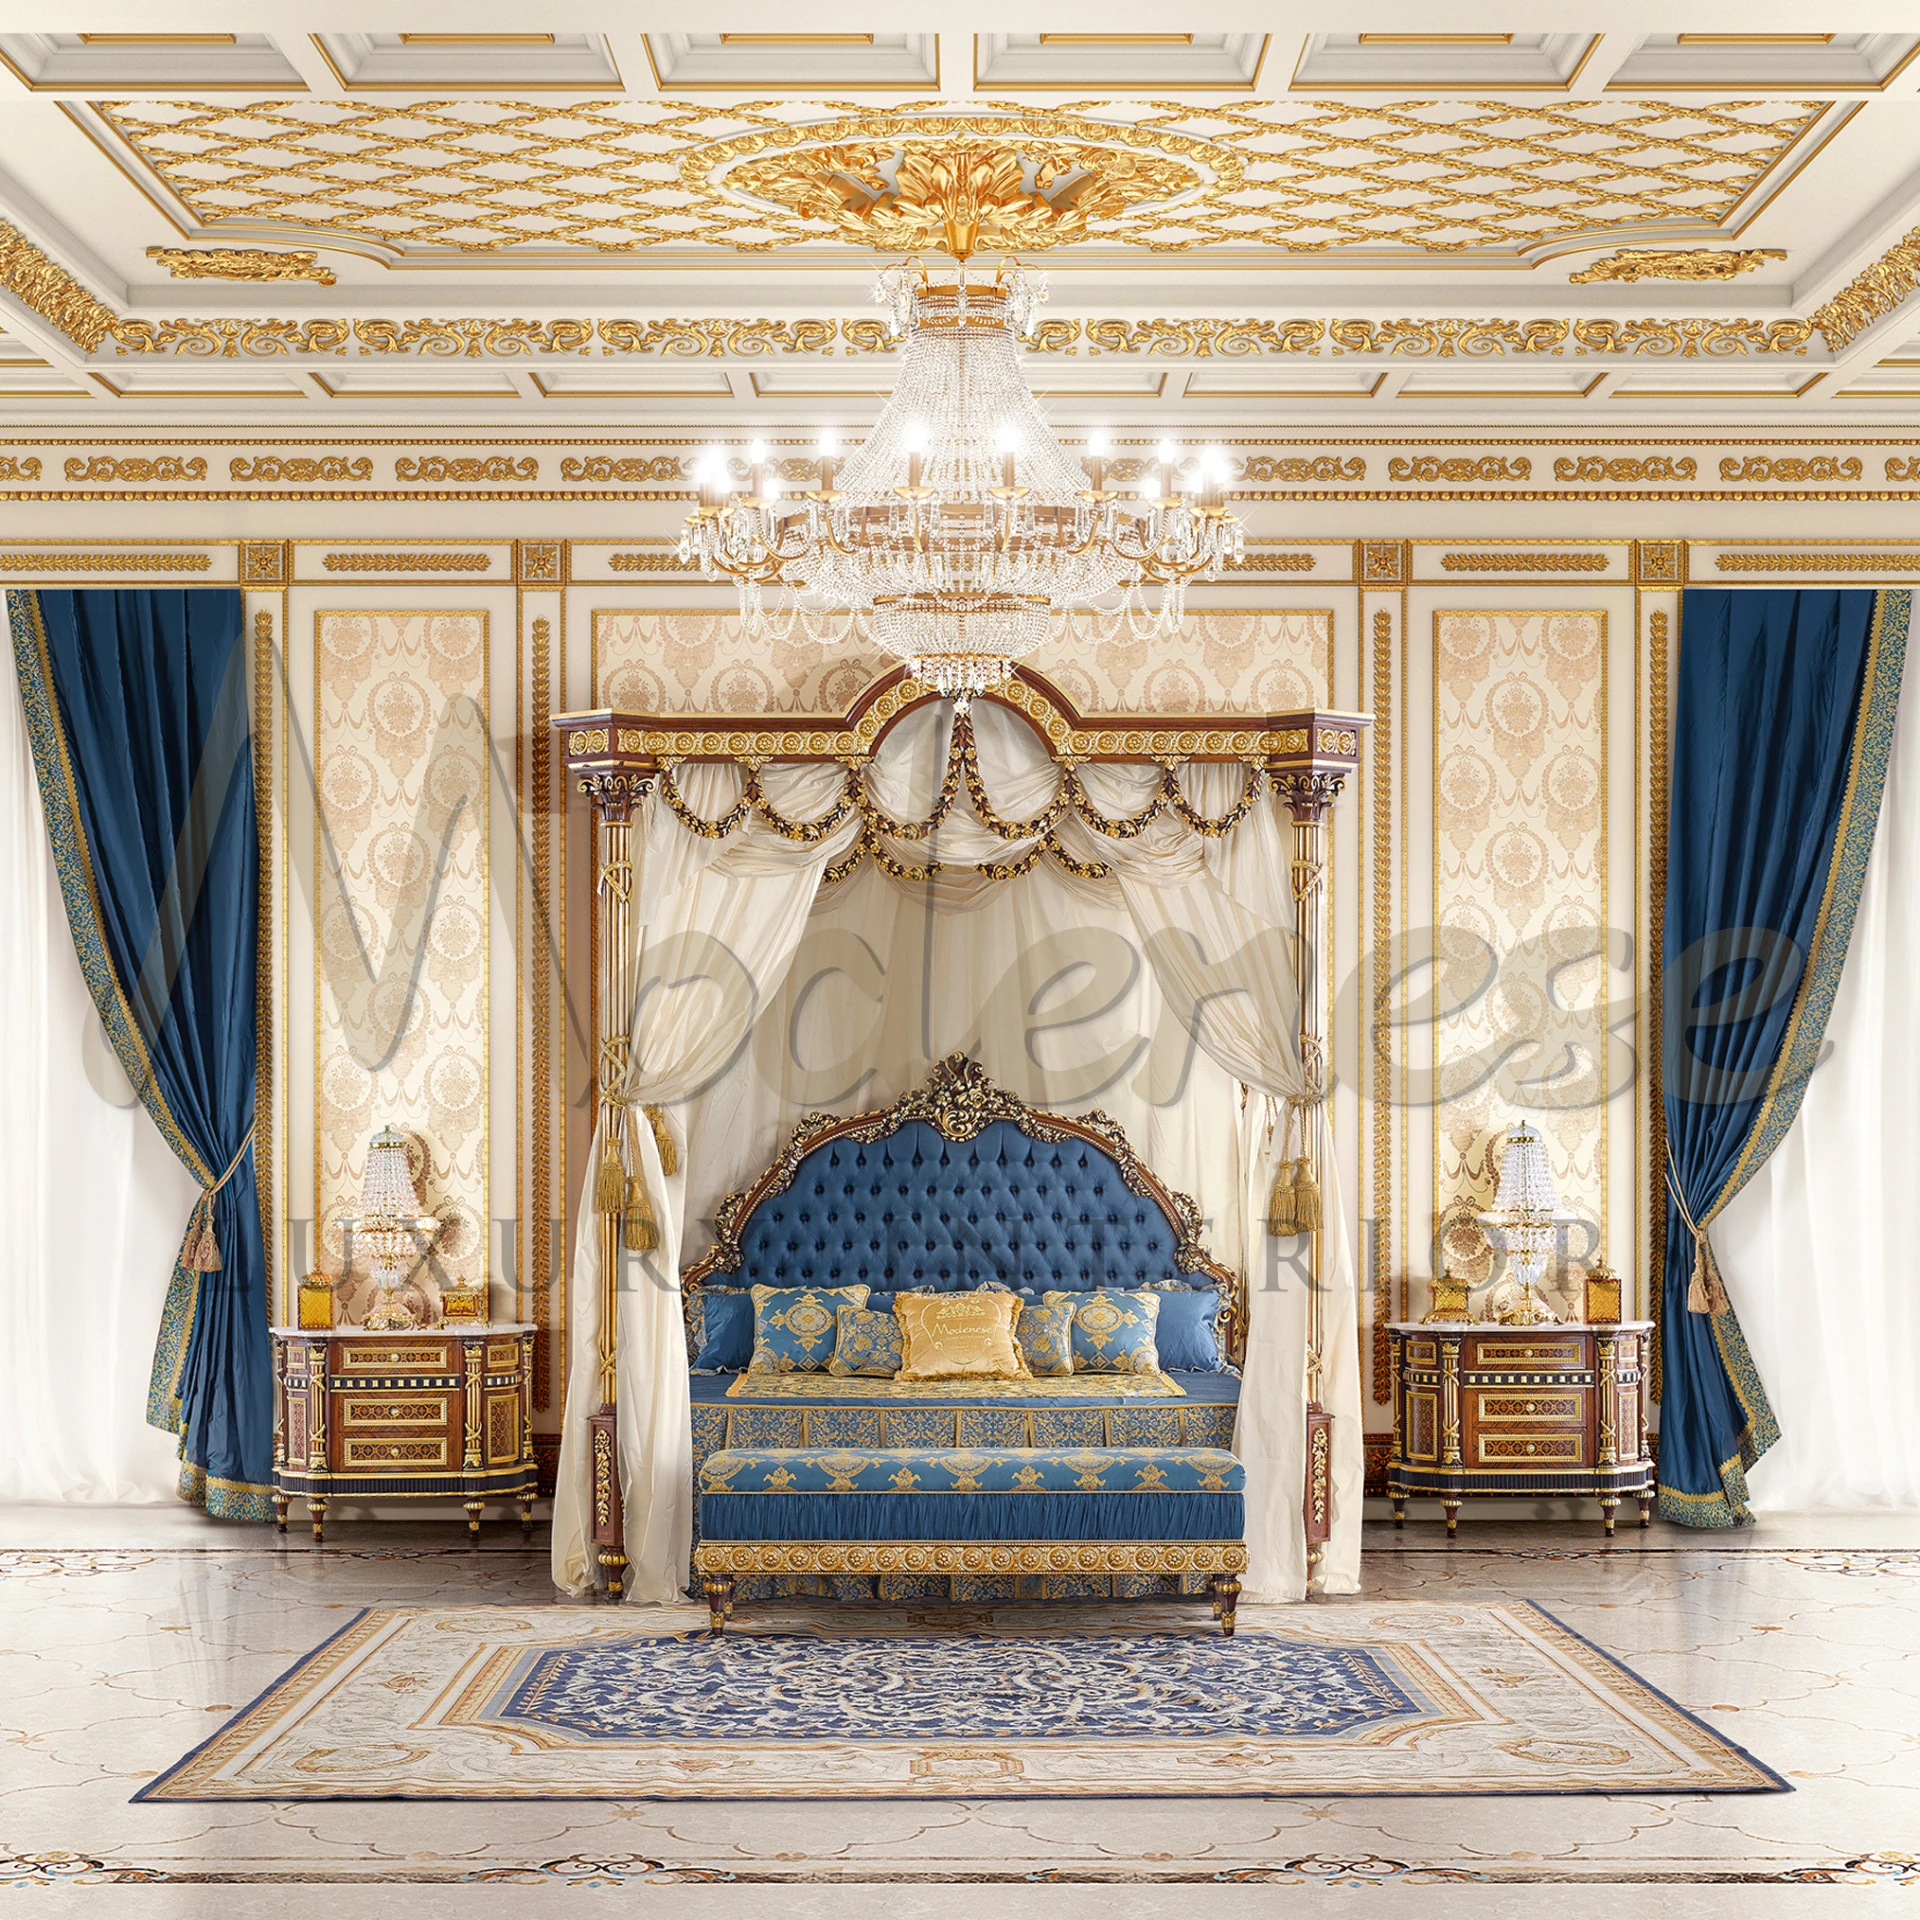 Create a sanctuary of splendor with our Royal Canopy Bed. Its ornate details and majestic presence promise nights of unparalleled luxury and comfort.